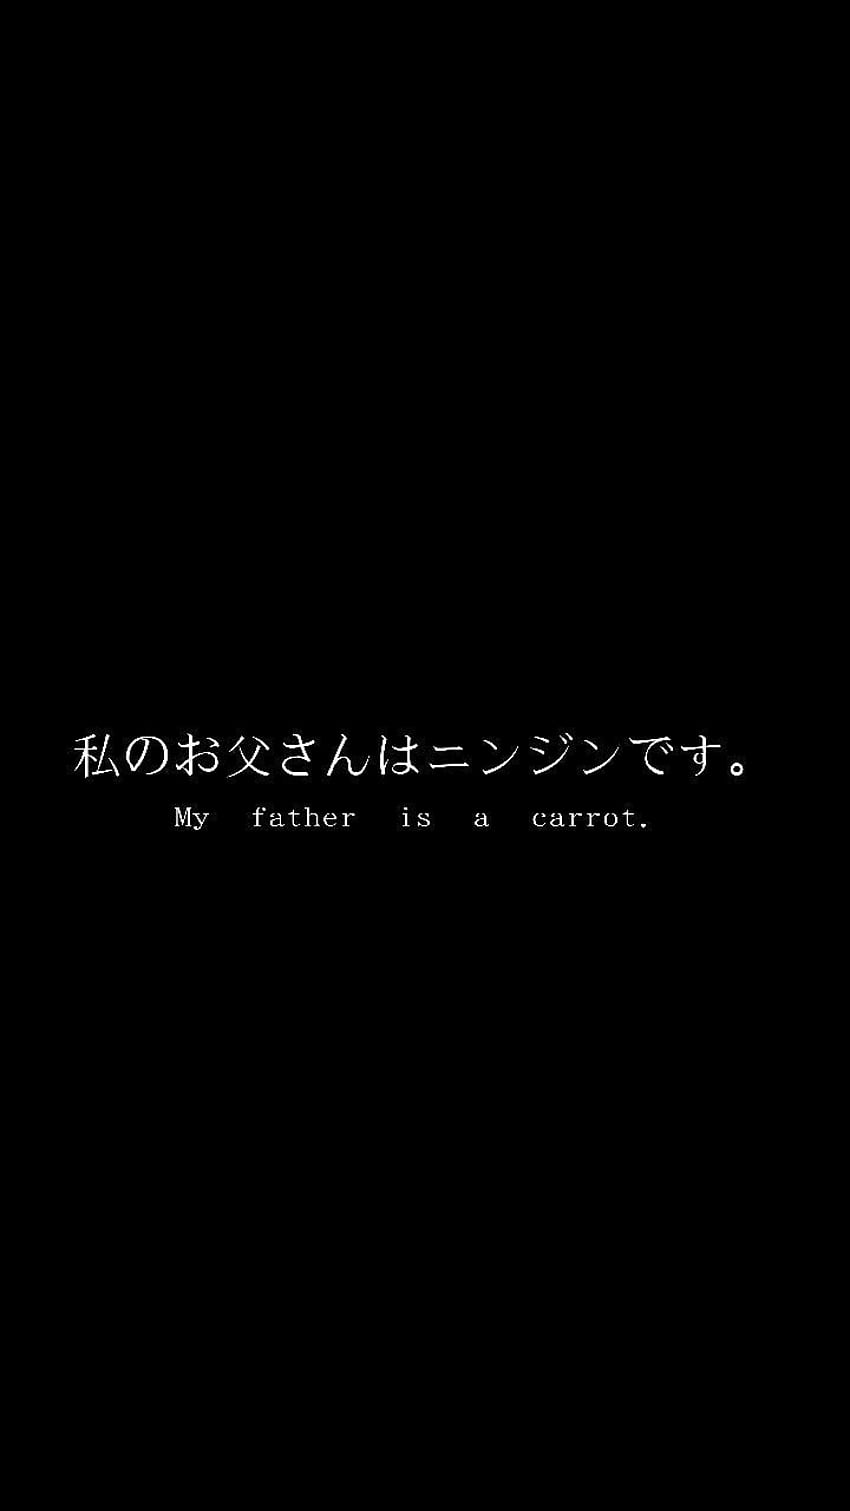 Japanese Aesthetic . Words , Japanese quotes, Aesthetic words, Dark ...